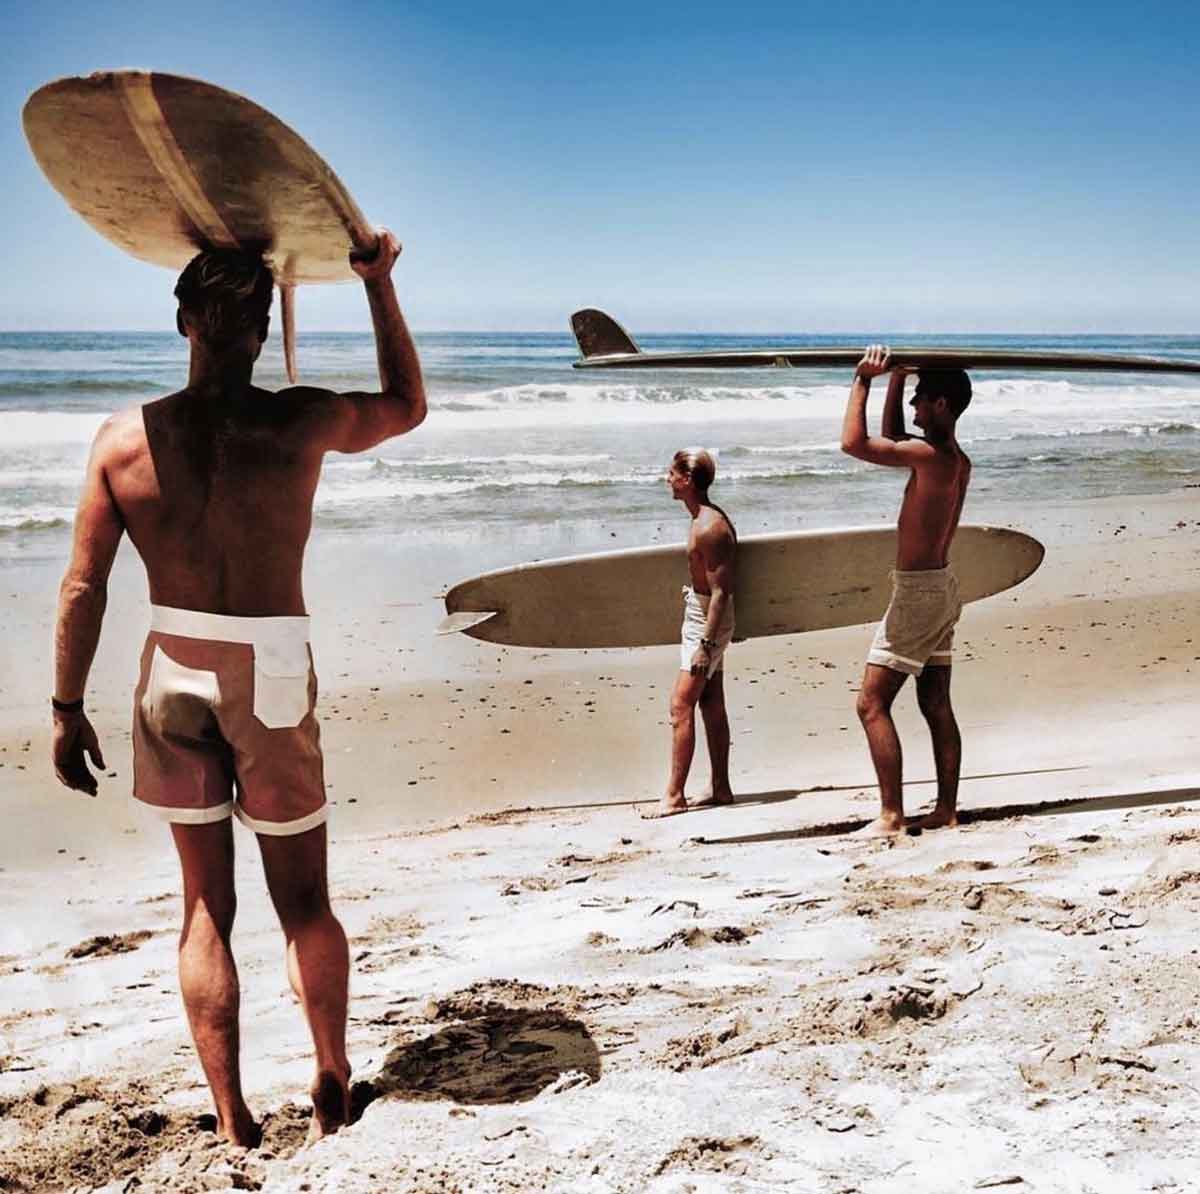 Birth of The Endless Summer - Carvemag.com